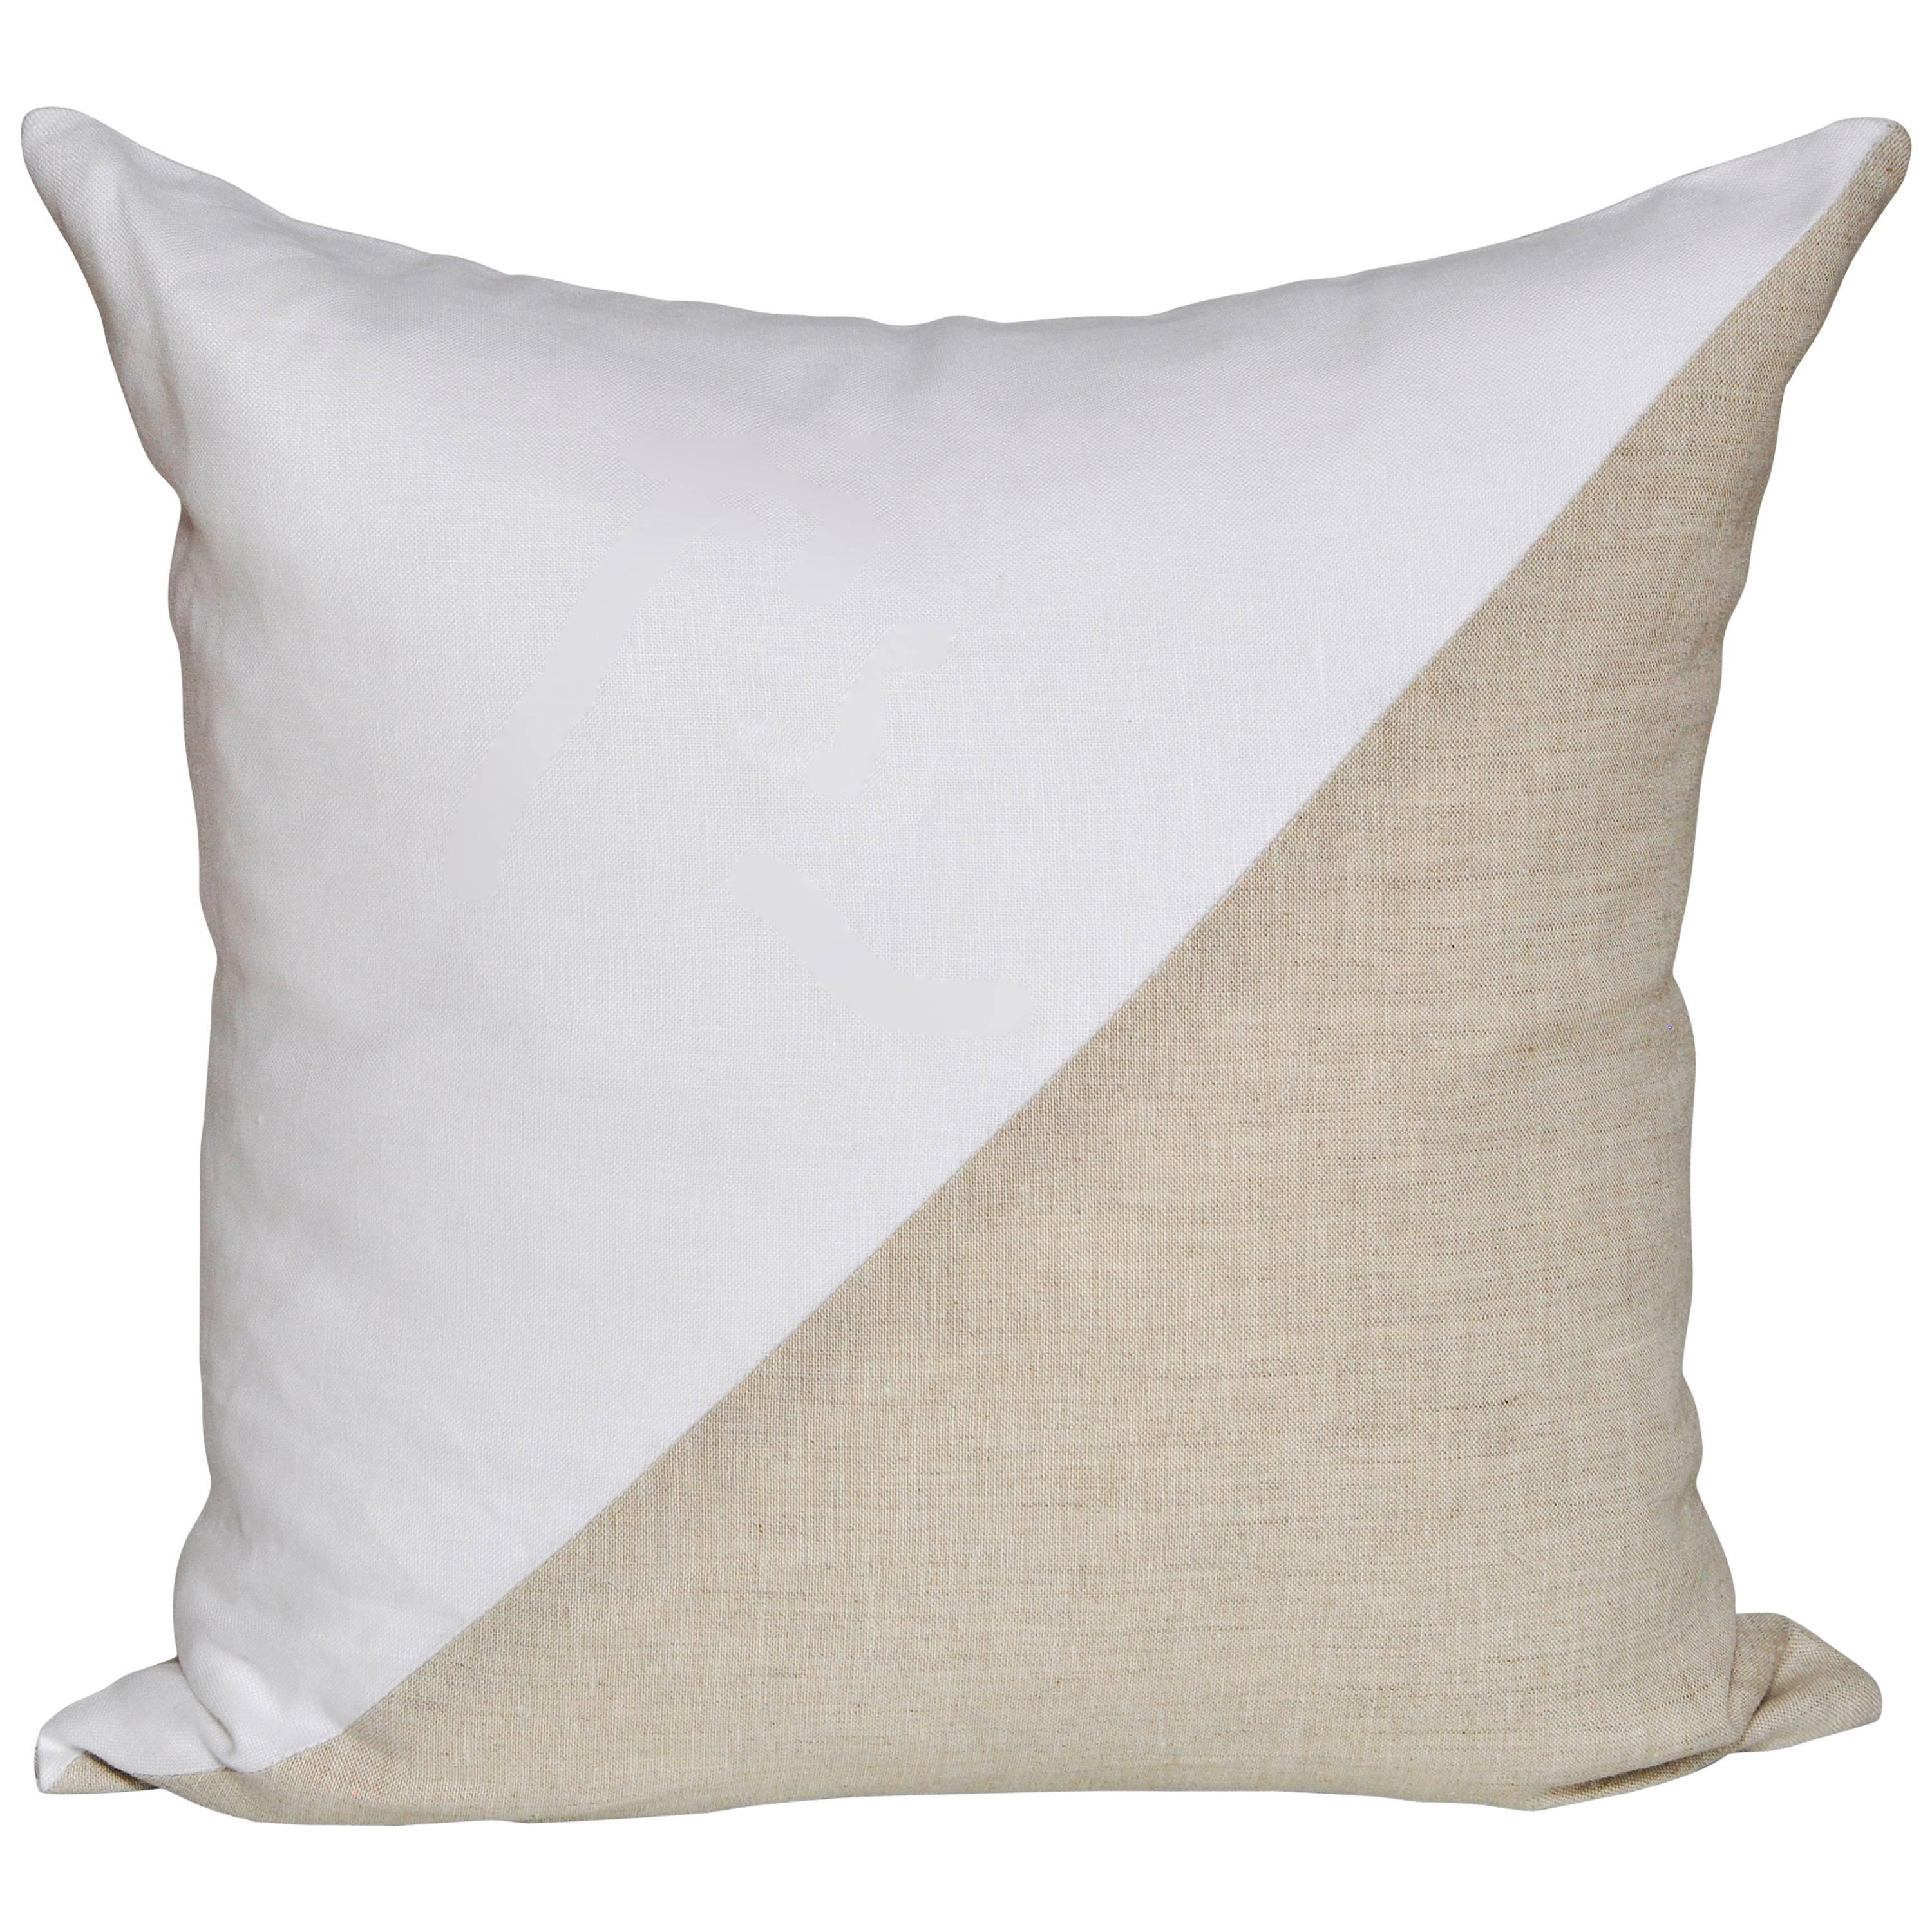 Large Irish Linen Geometric Cushion in Vintage White and Natural Oatmeal Pillow For Sale